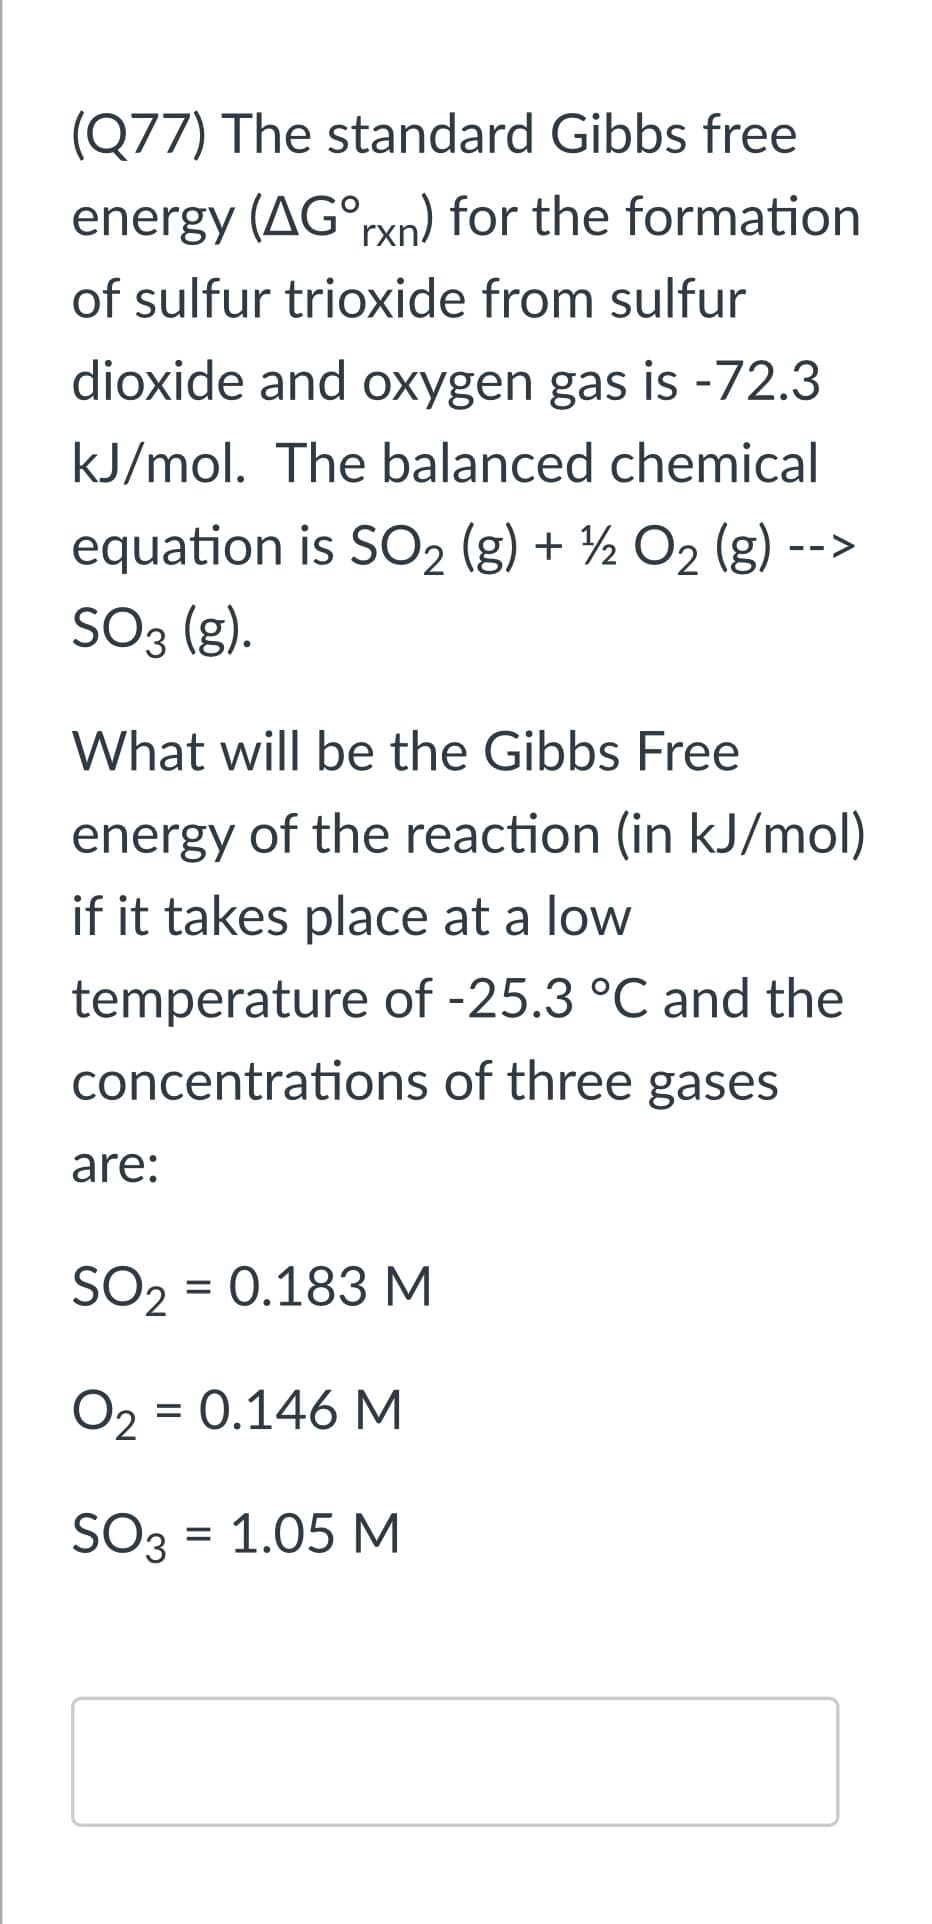 (Q77) The standard Gibbs free
energy (AG°rxn) for the formation
of sulfur trioxide from sulfur
dioxide and oxygen gas is -72.3
kJ/mol. The balanced chemical
equation is SO2 (g) + ½ O2 (g) -
-
SO3 (g).
What will be the Gibbs Free
energy of the reaction (in kJ/mol)
if it takes place at a low
temperature of -25.3 °C and the
concentrations of three gases
are:
SO2 = 0.183 M
O2 = 0.146 M
SO3 = 1.05 M
